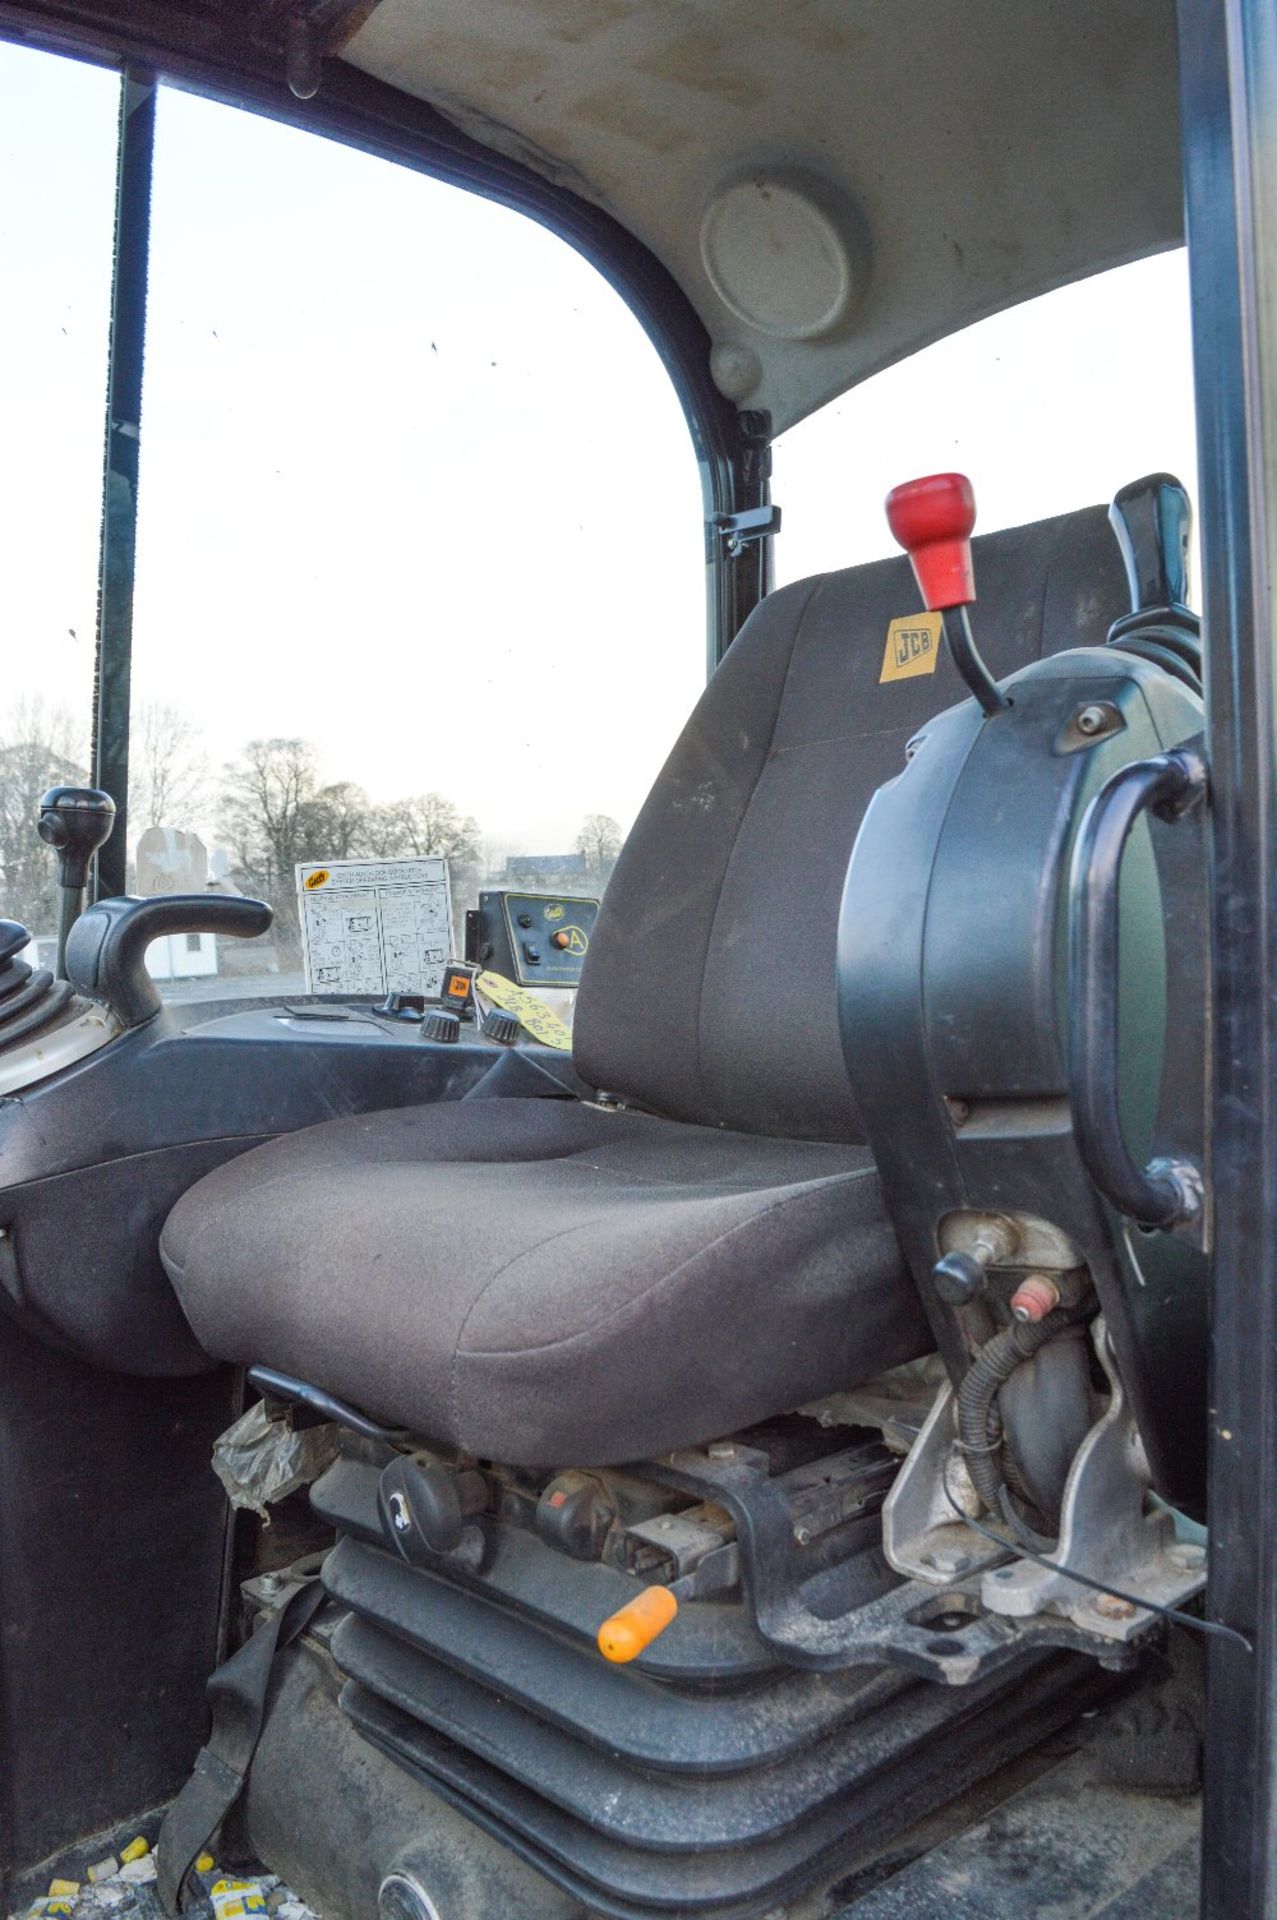 JCB 8050 RTS 5 tonne reduced tail swing rubber tracked mini excavator
Year: 2011
S/N: 1741659 - Image 12 of 12